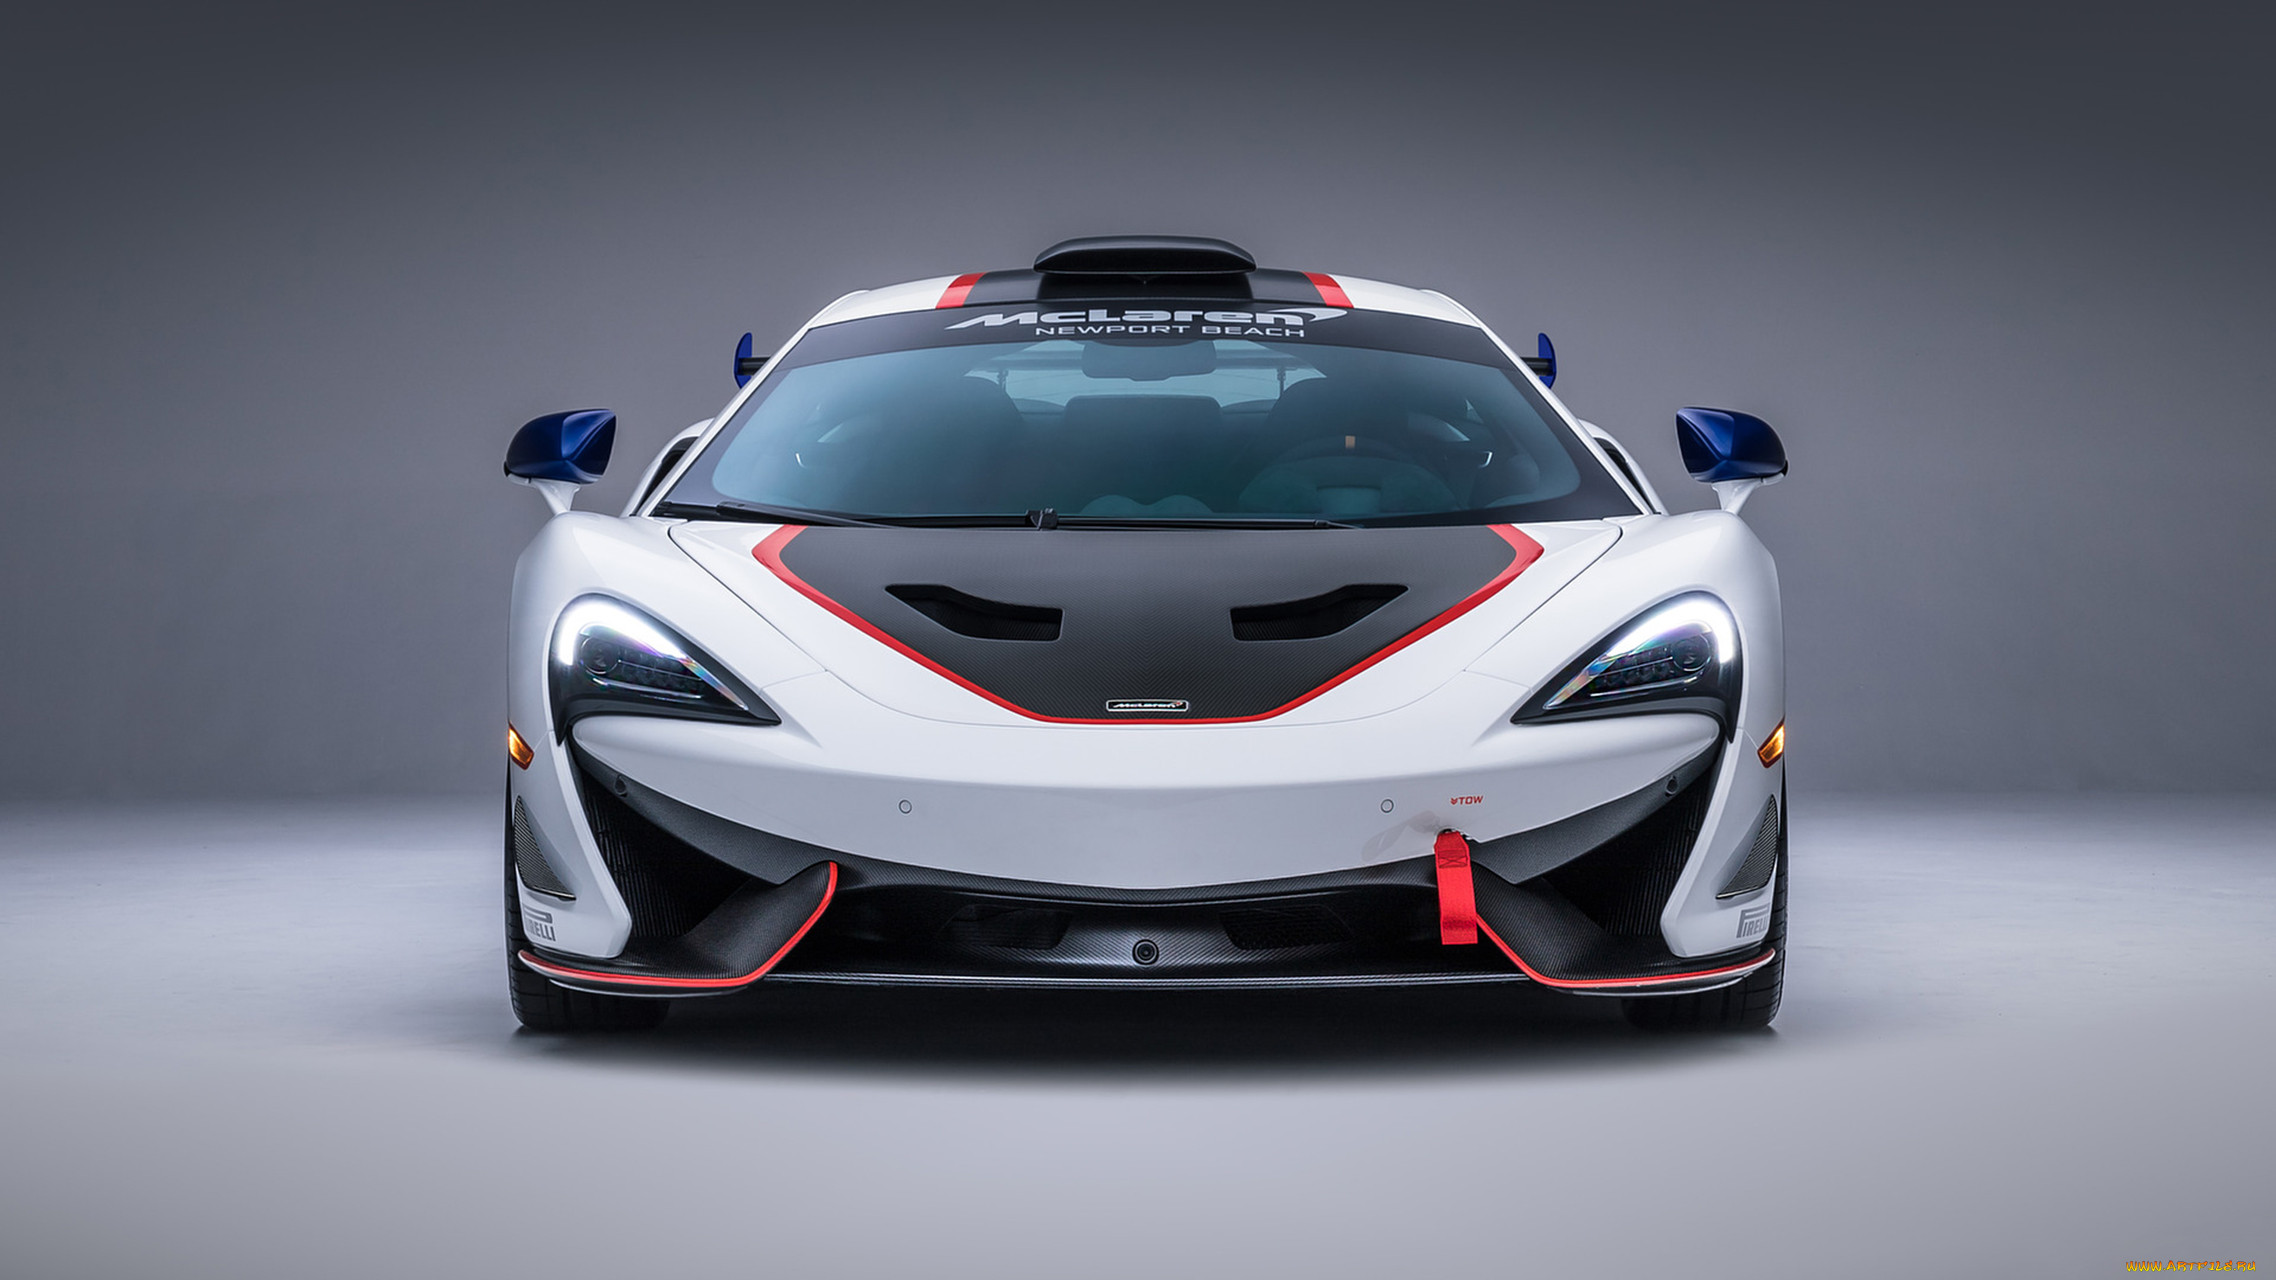 mclaren 570s gt4-mso x no8 white red and blue accents 2018, , mclaren, 570s, gt4-mso, x, no8, white, red, blue, accents, 2018